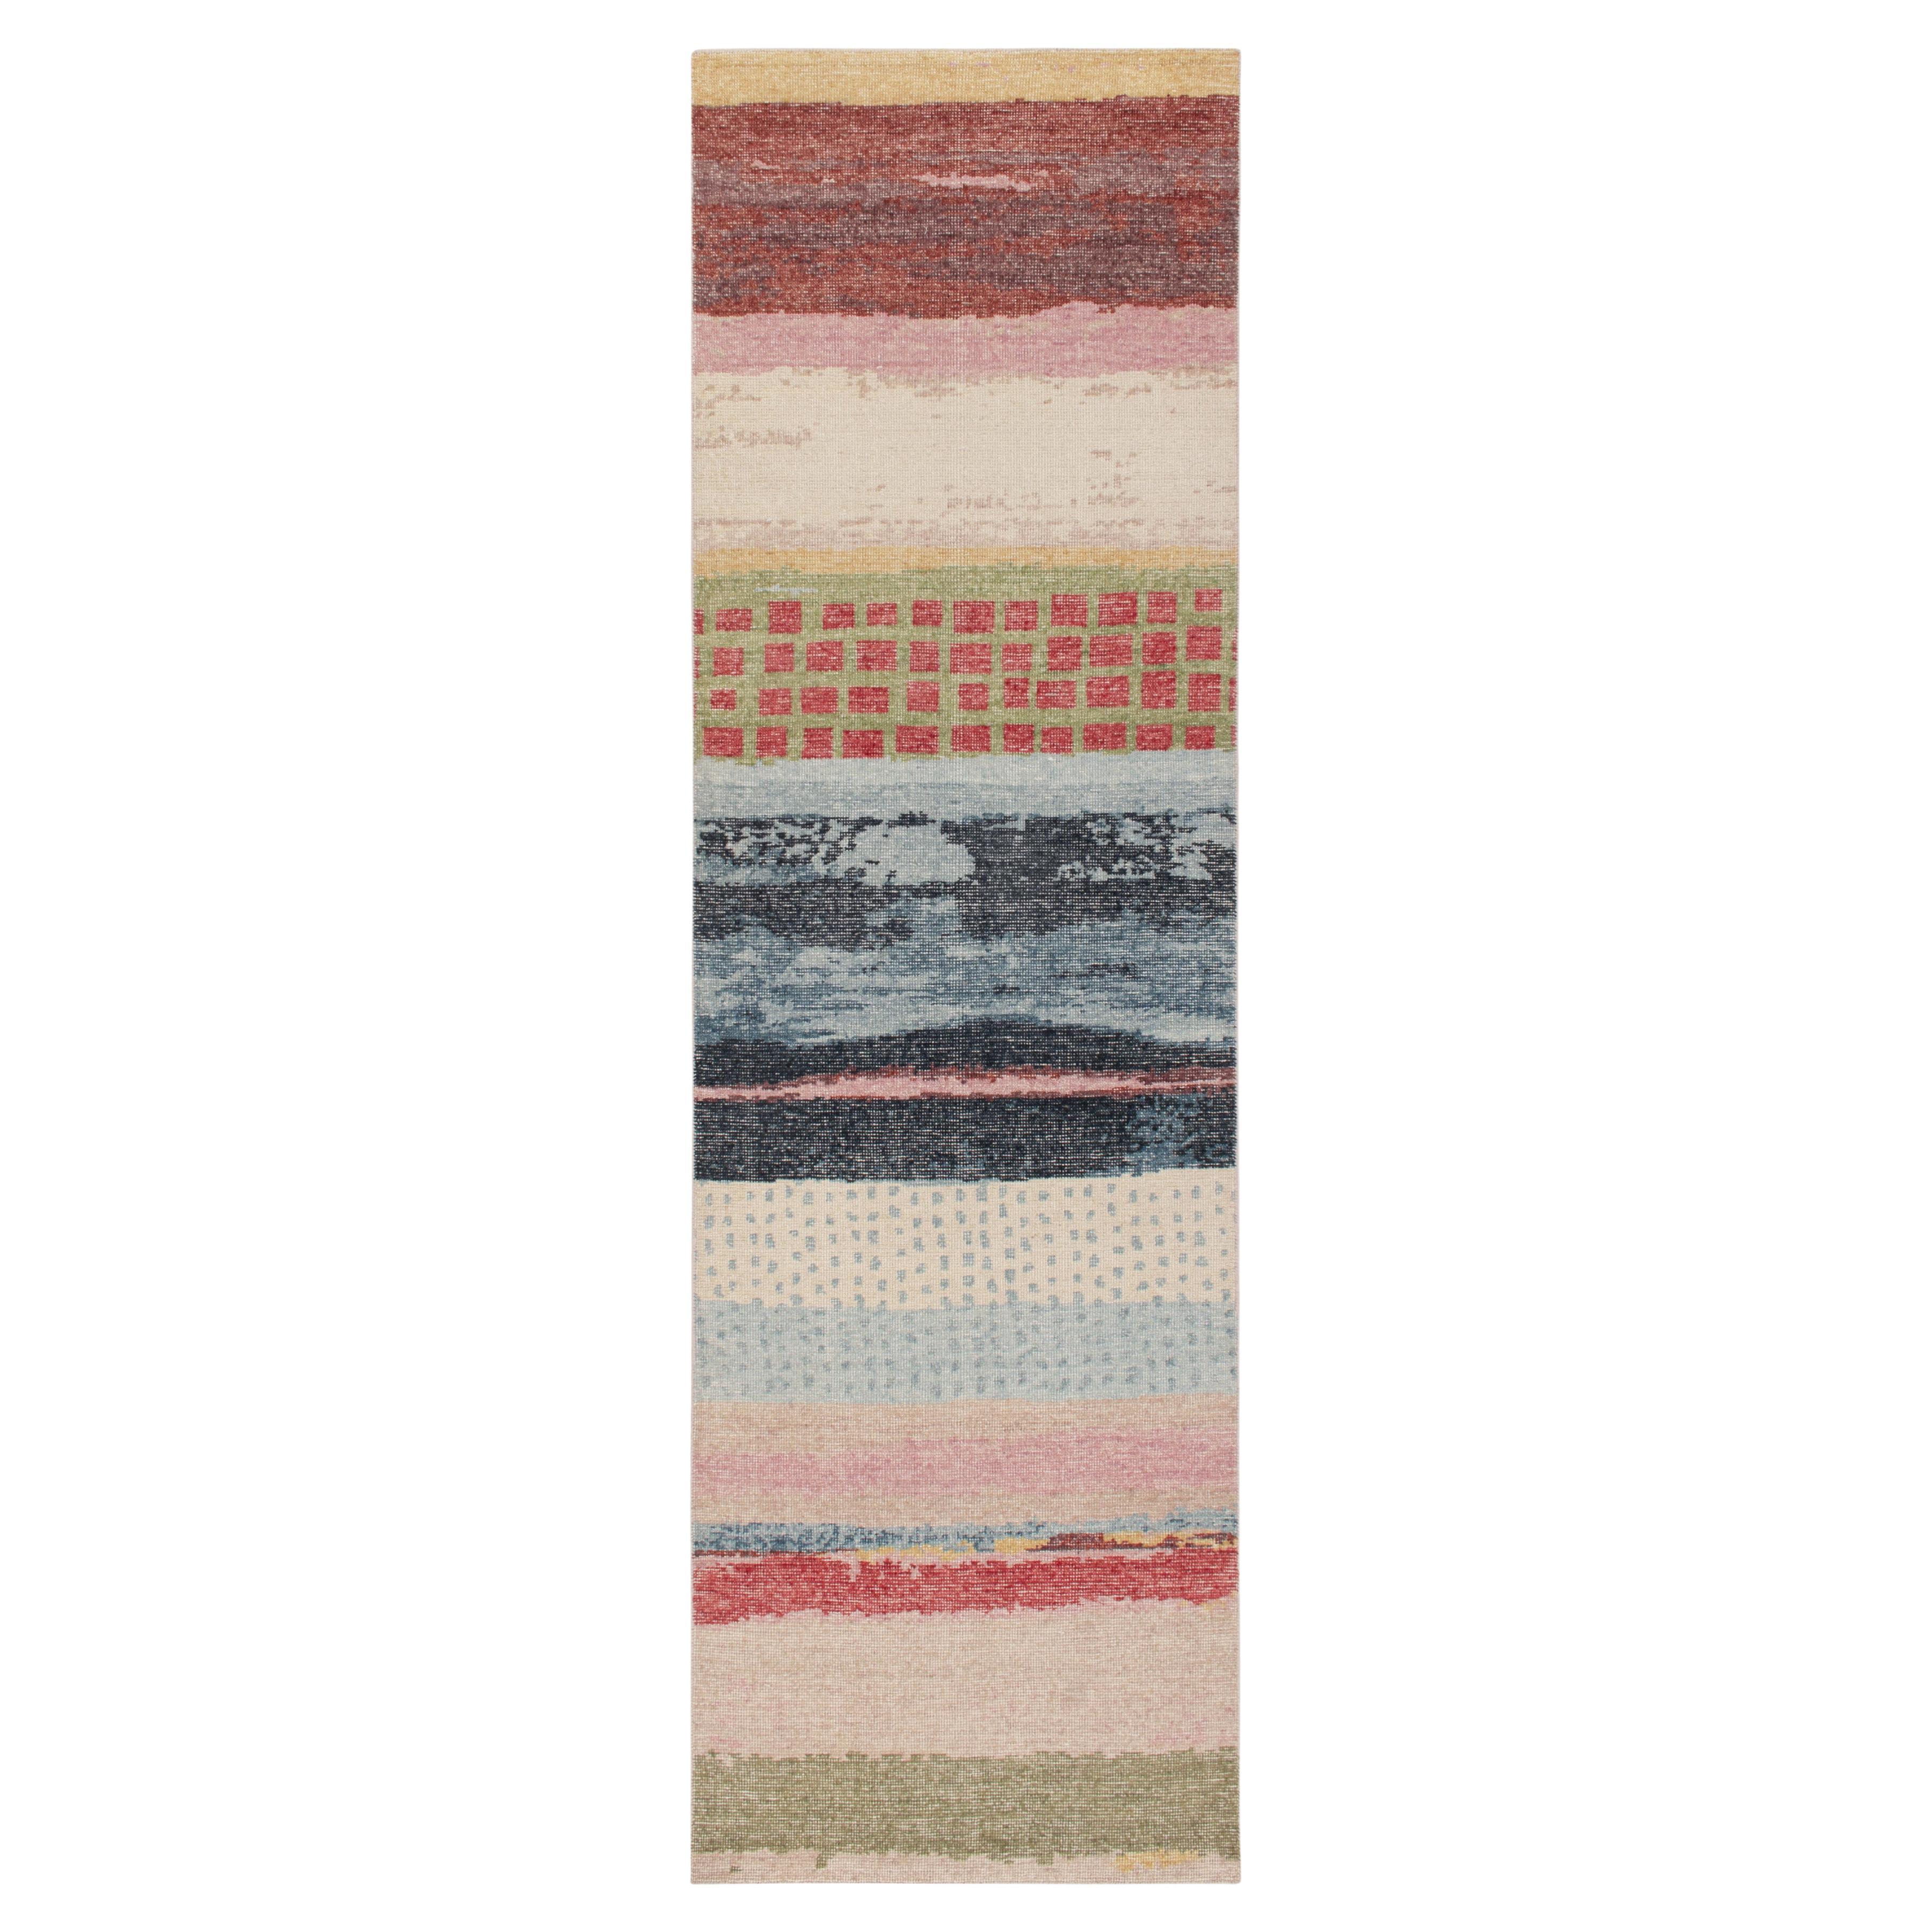 Rug & Kilim’s Distressed style Modern runner in Multihued Abstract Patterns For Sale